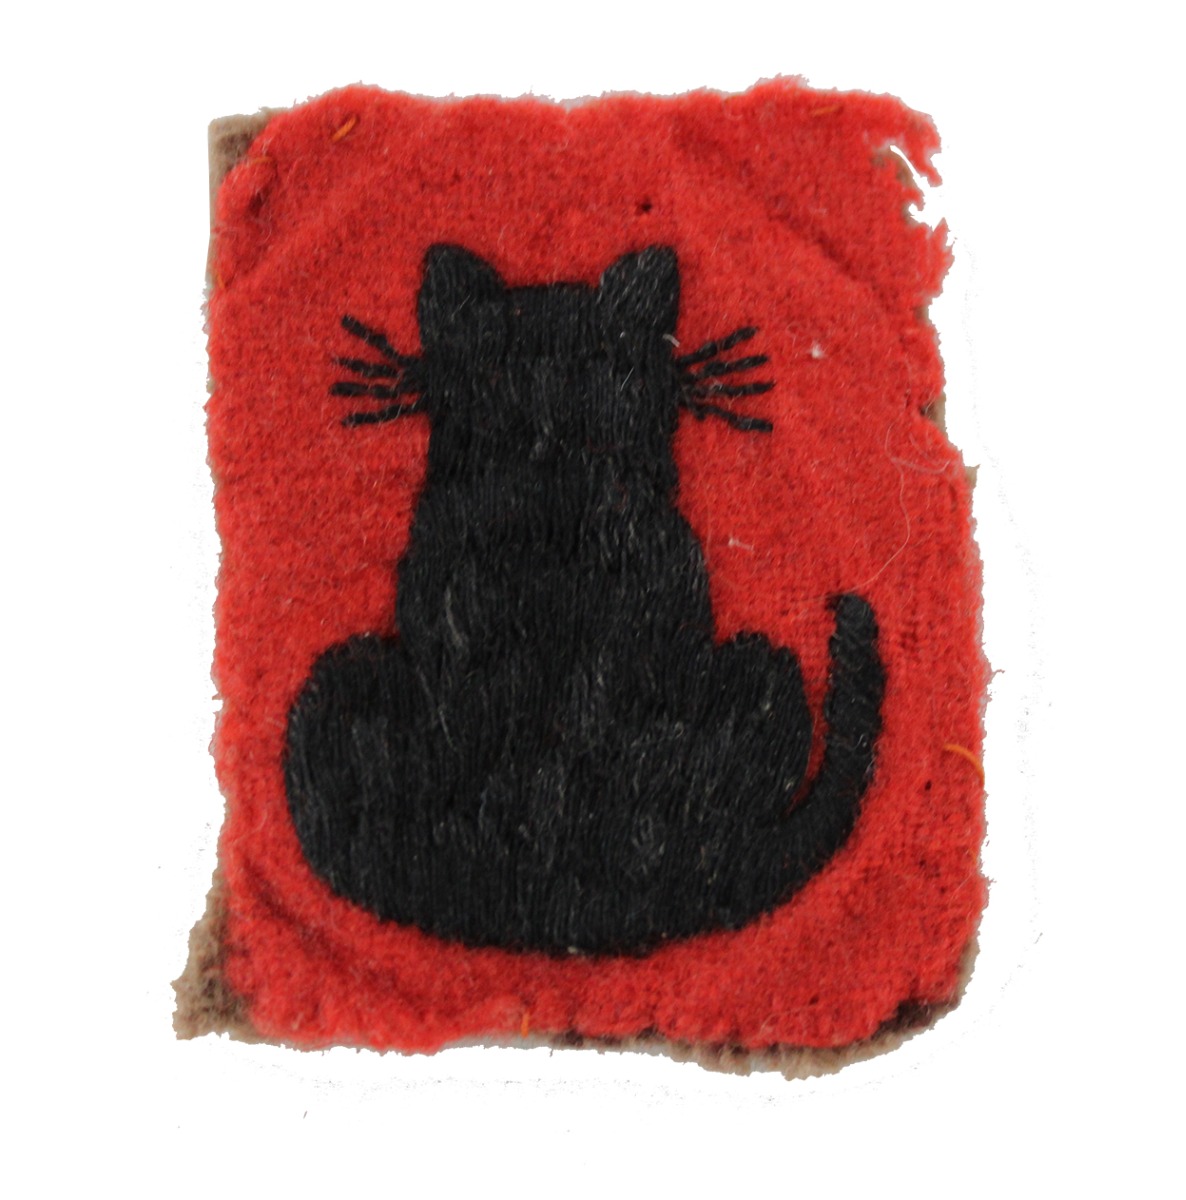 BRITISH 56thINFANTRY DIVISION PATCH ORIGINAL  WW2 ARMY LONDON INF. DIV.  BLACK CAT